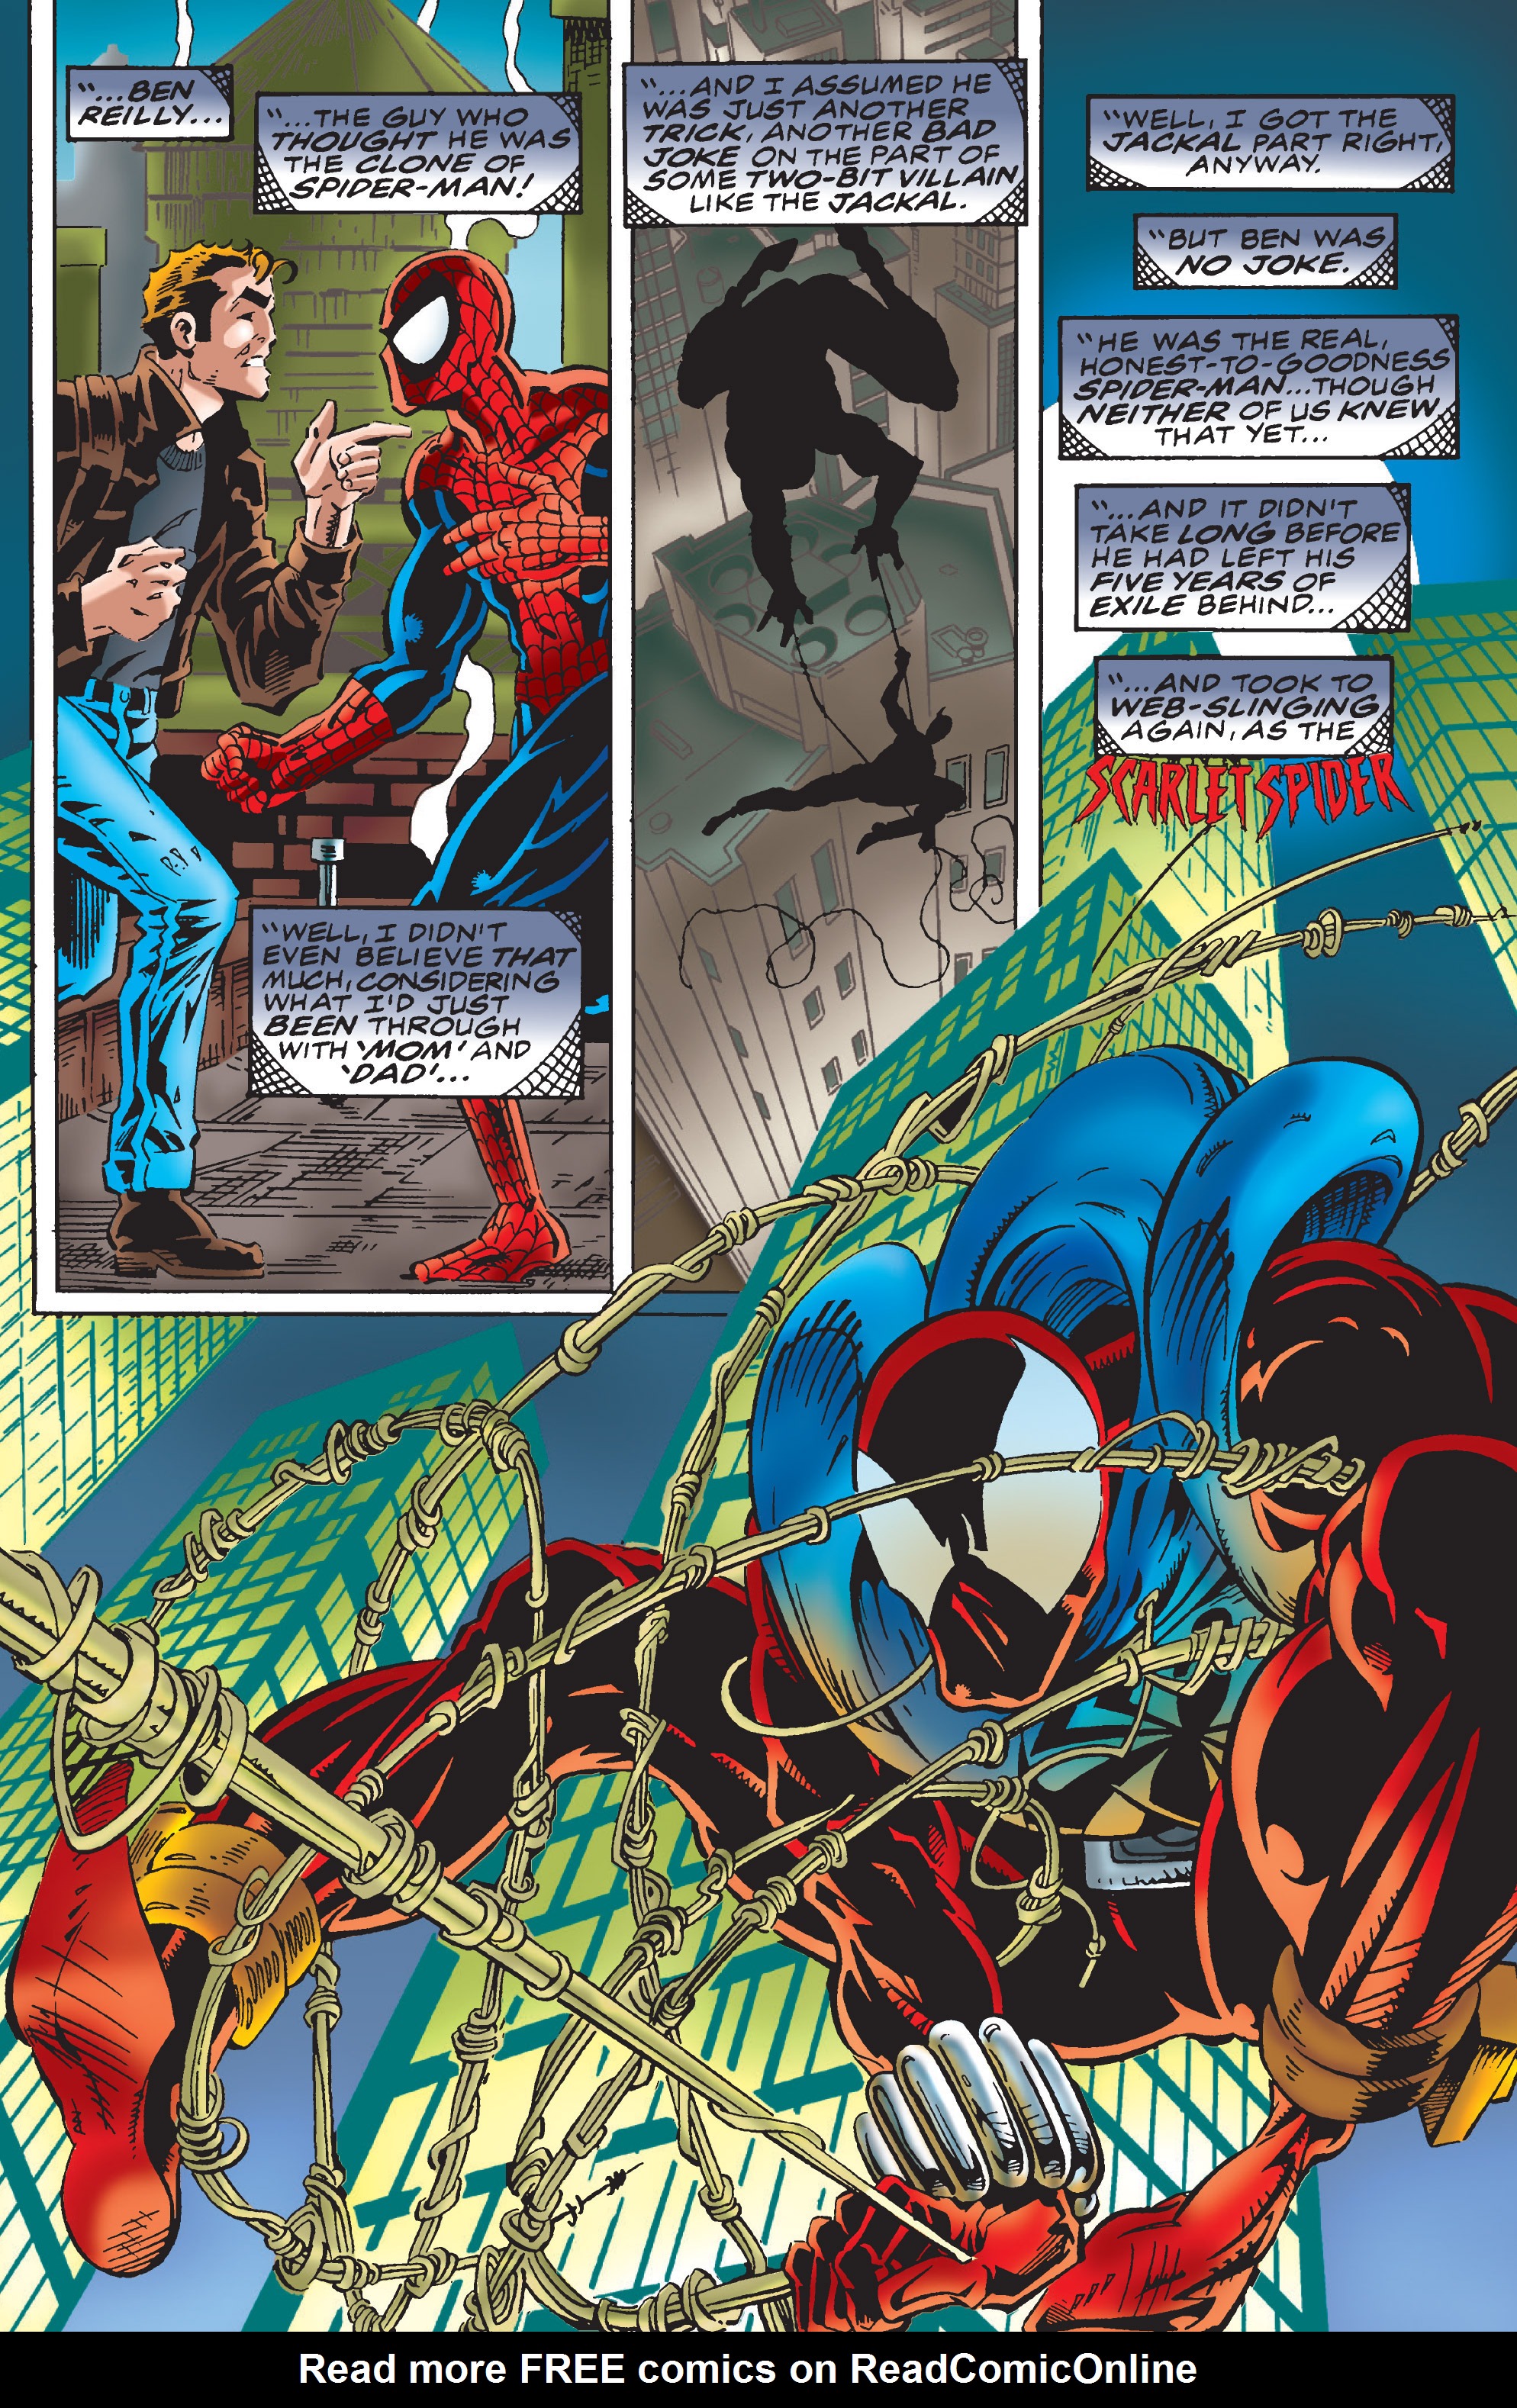 Read online The Amazing Spider-Man: The Complete Ben Reilly Epic comic -  Issue # TPB 1 - 20